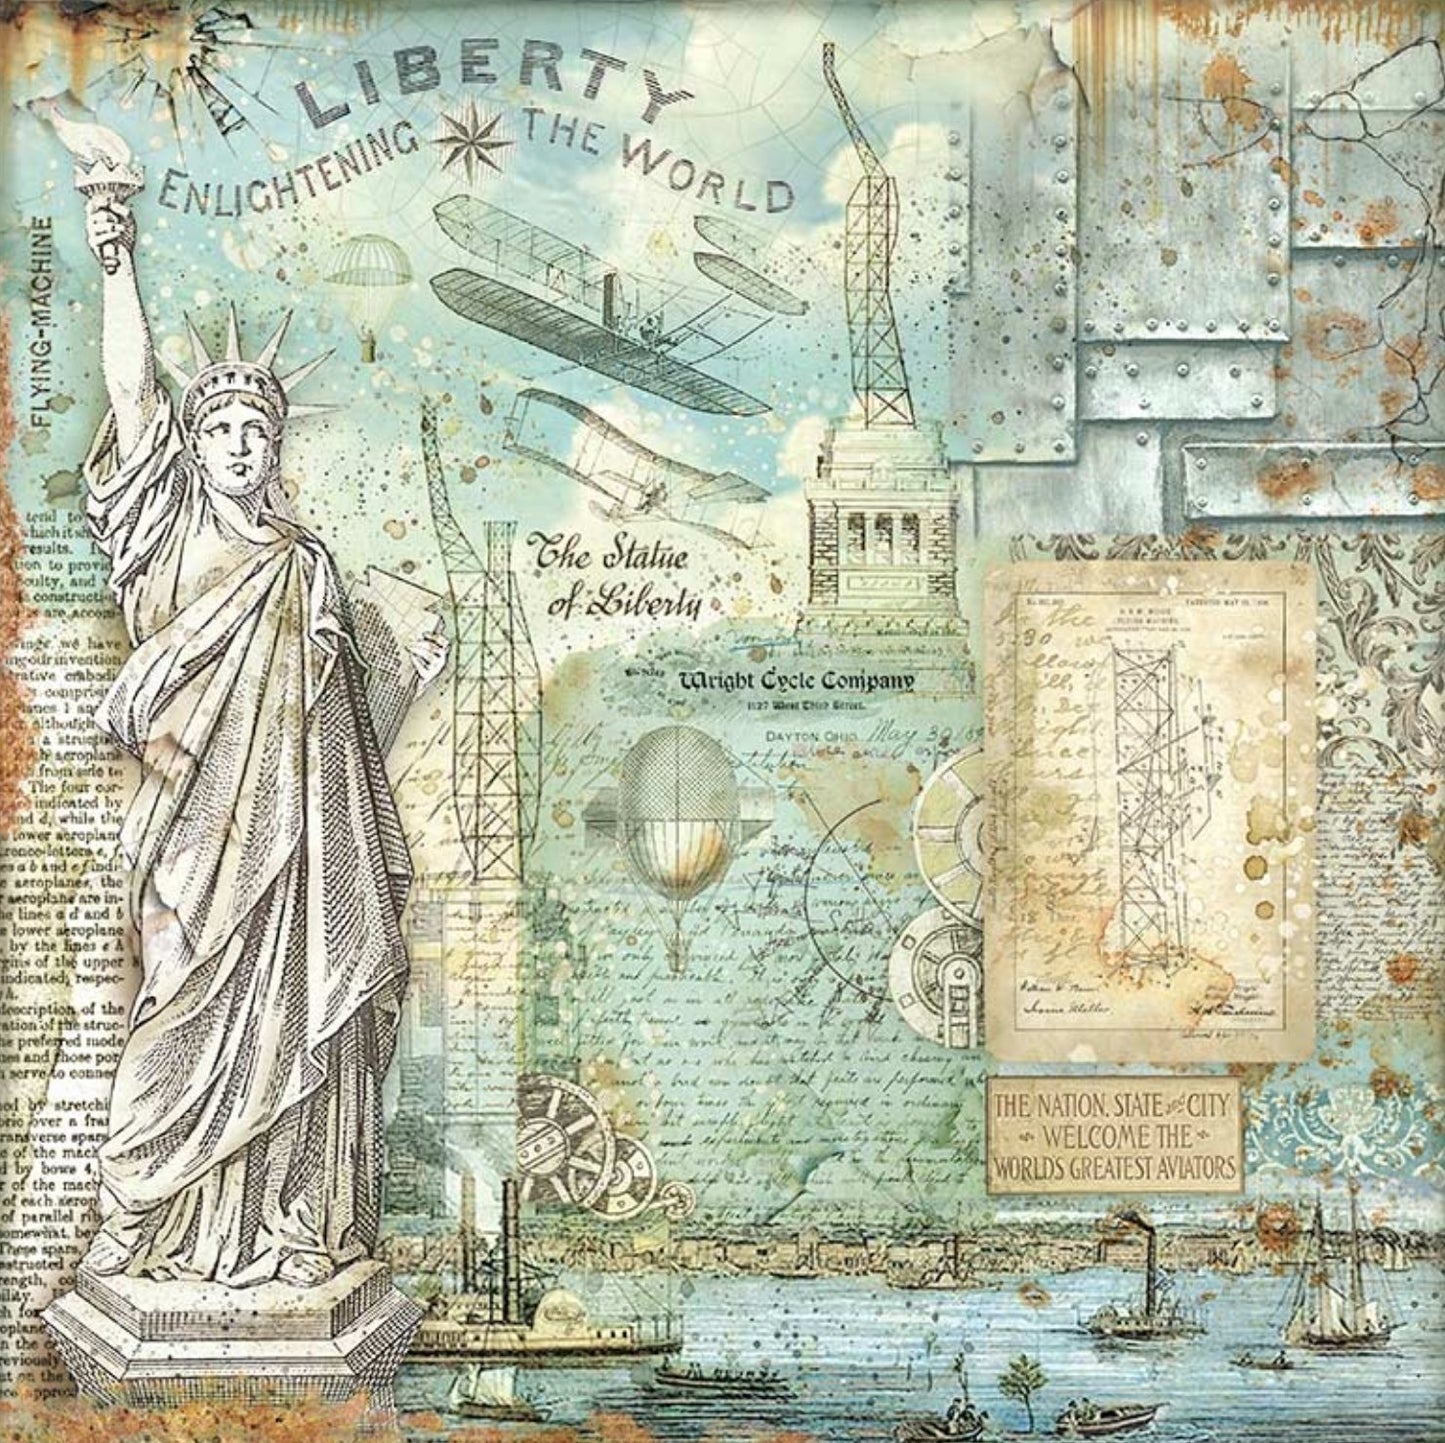 Stamperia - Scrapbooking Small Pad 10 sheets cm 20,3X20,3 (8"X8") Backgrounds Selection - Sir Vagabond Aviator Stamperia